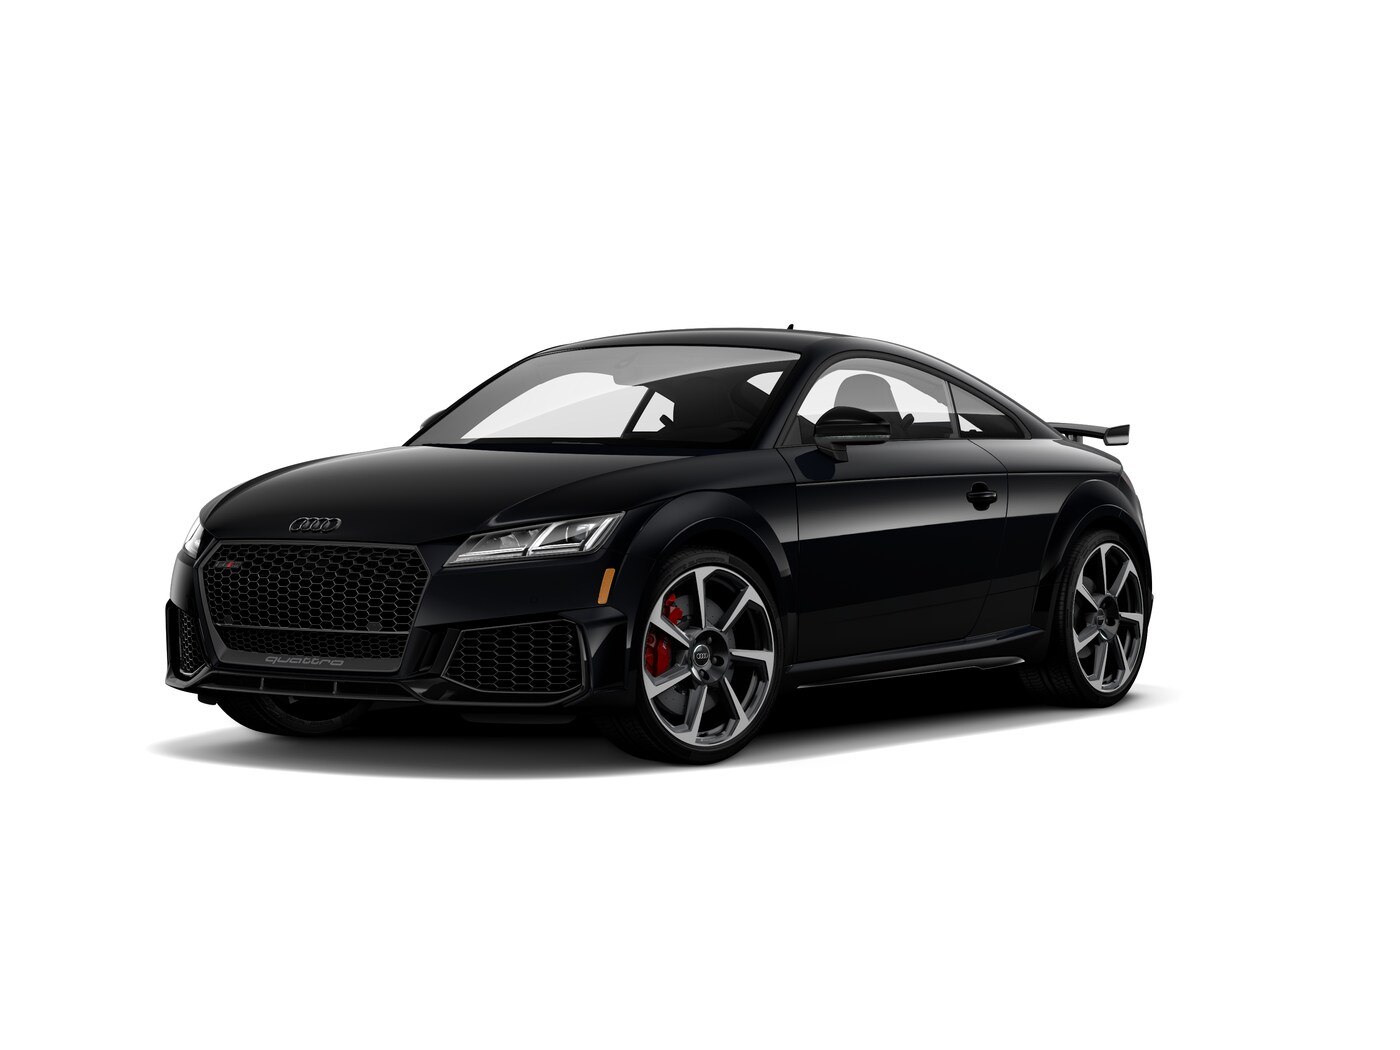 New 2020 Audi Tt Rs For Sale At Audi Pacific Vin Wuaasafv3l1900500